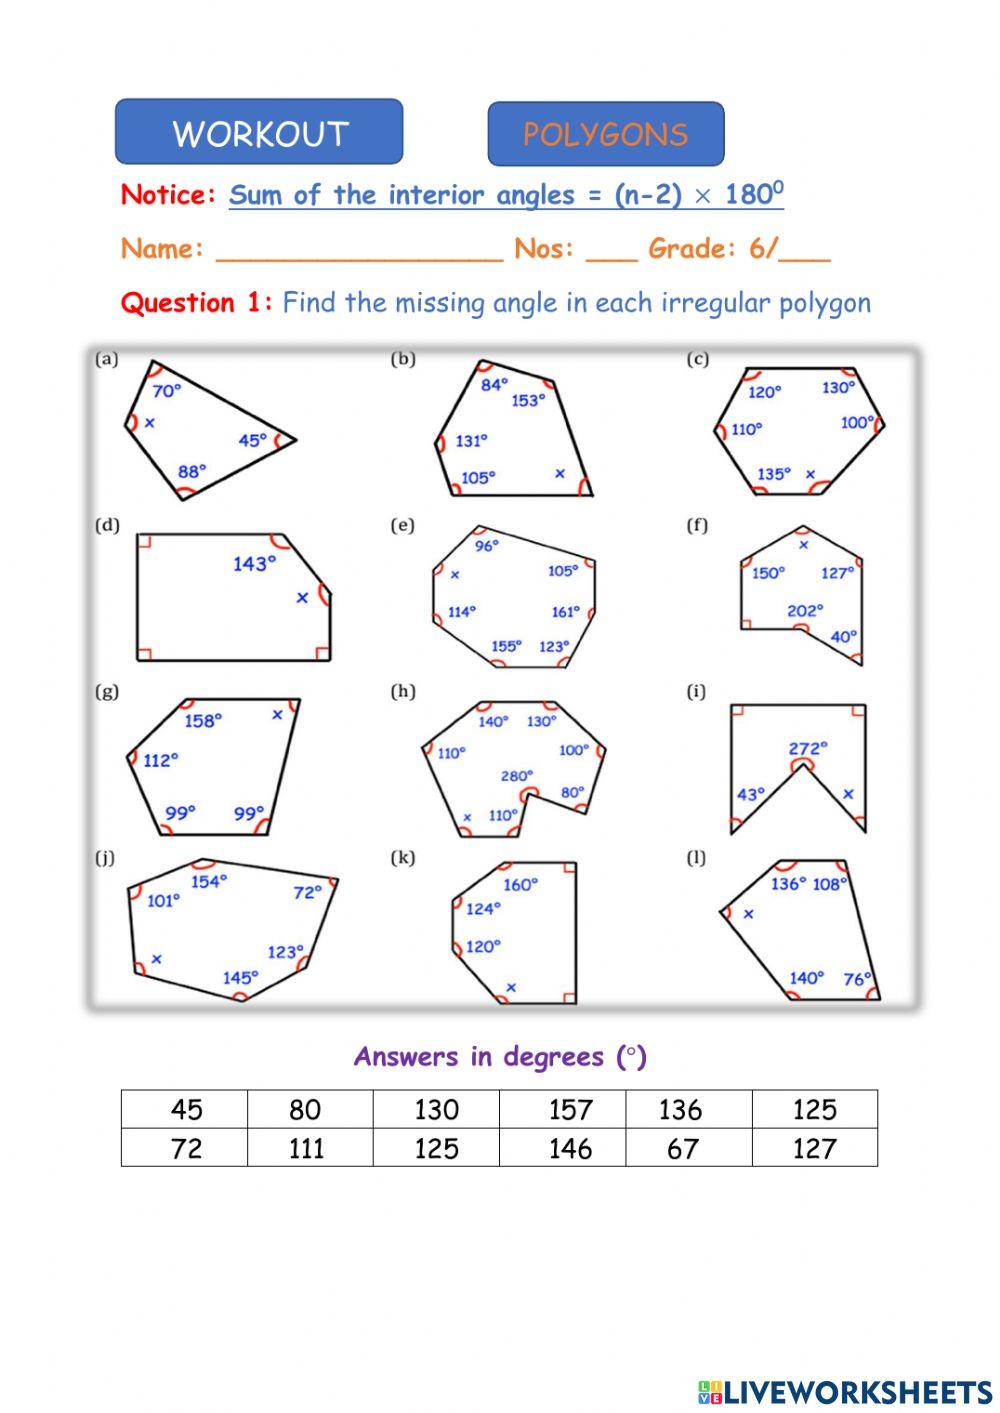 polygons-finding-the-missing-angles-g6-worksheet-math-worksheet-answers